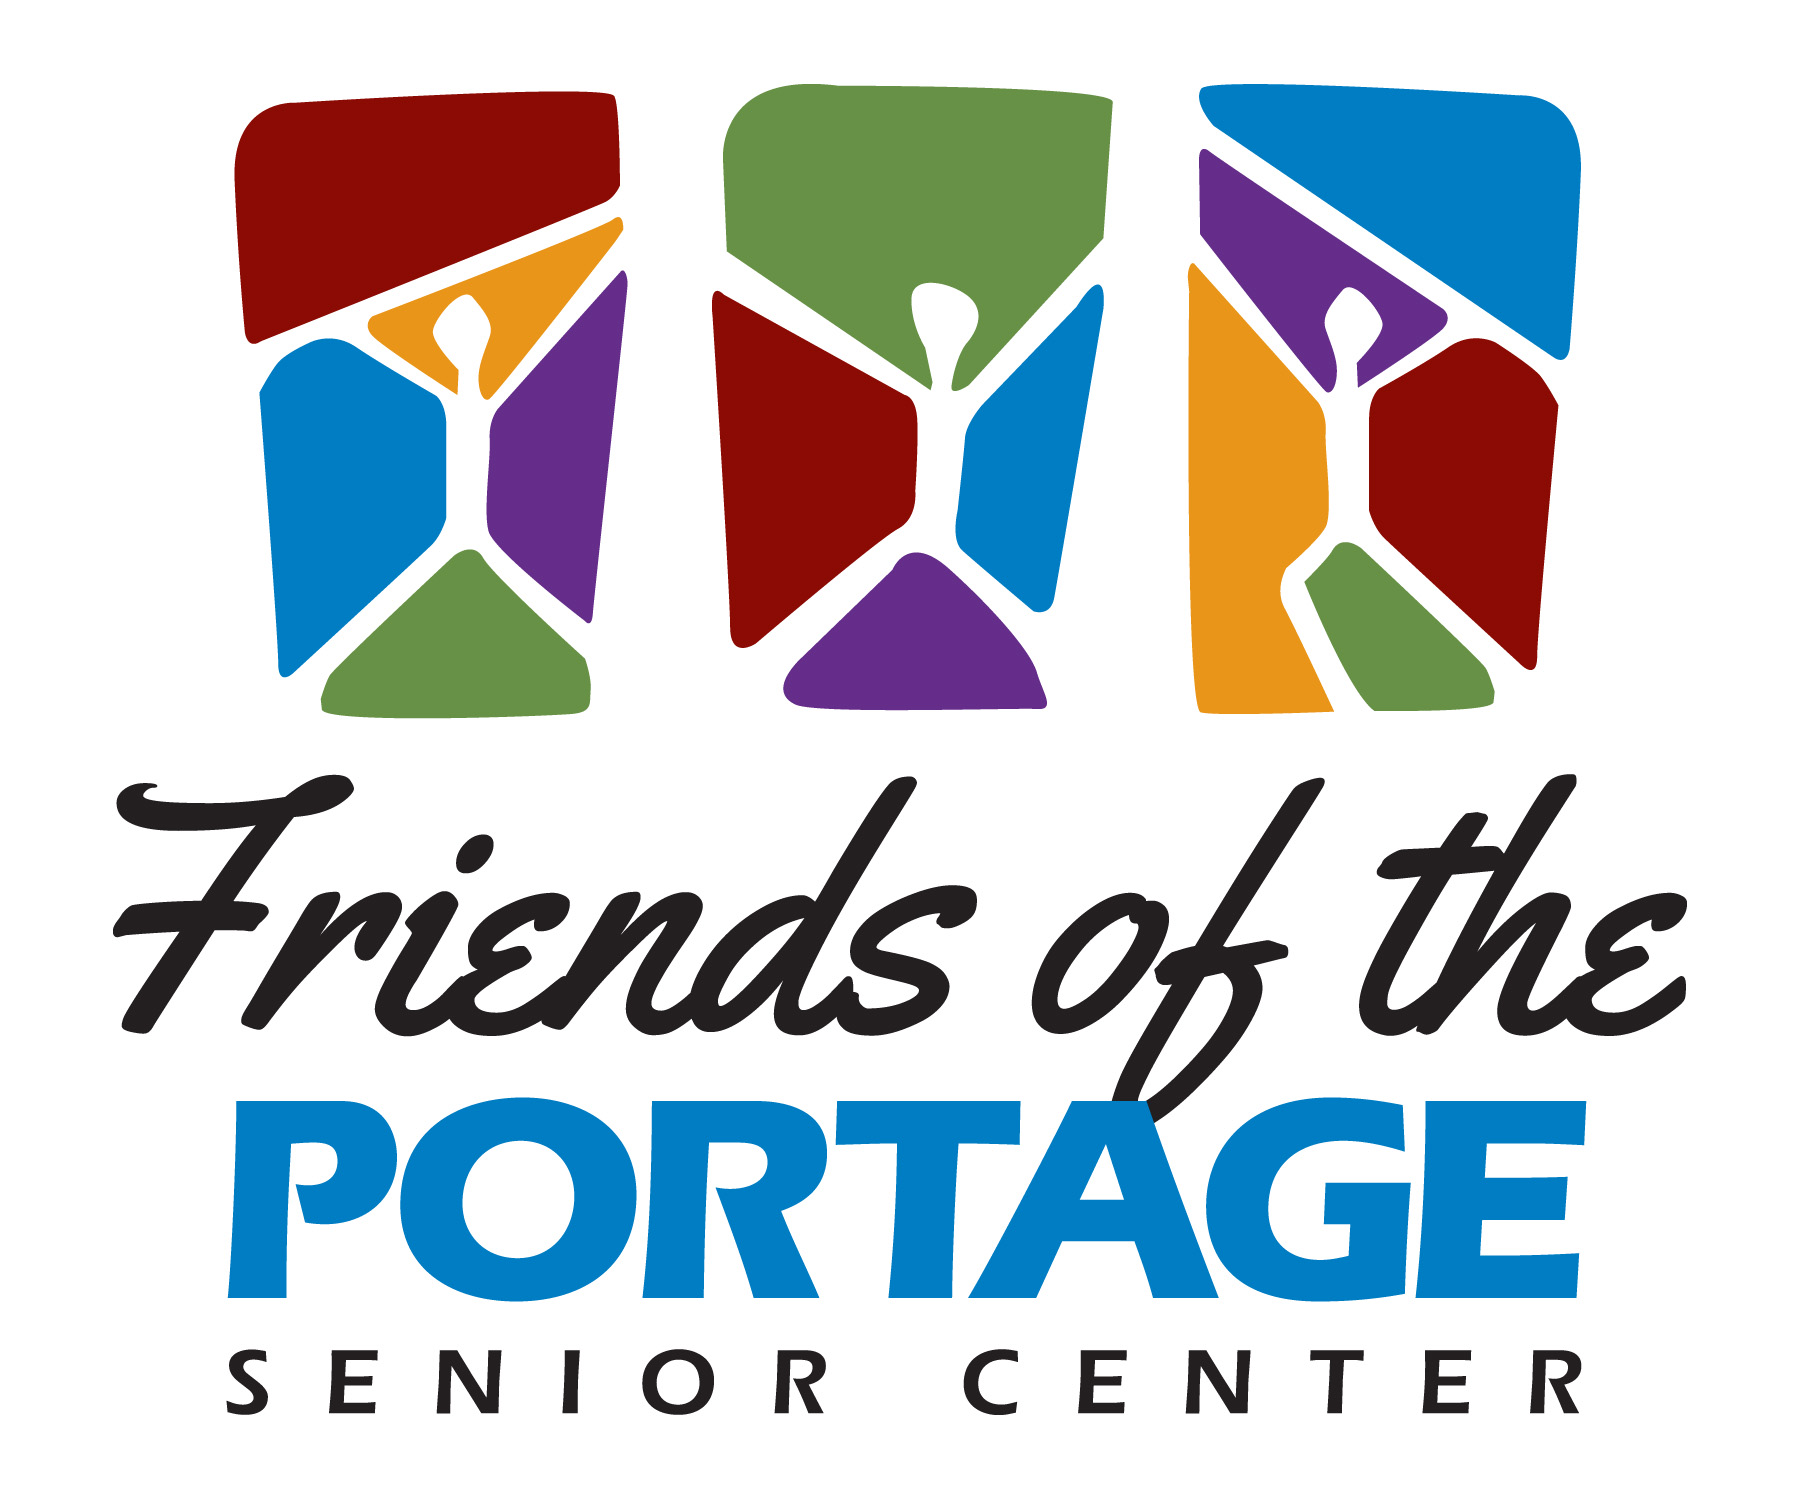 The Friends of the Portage Senior Center